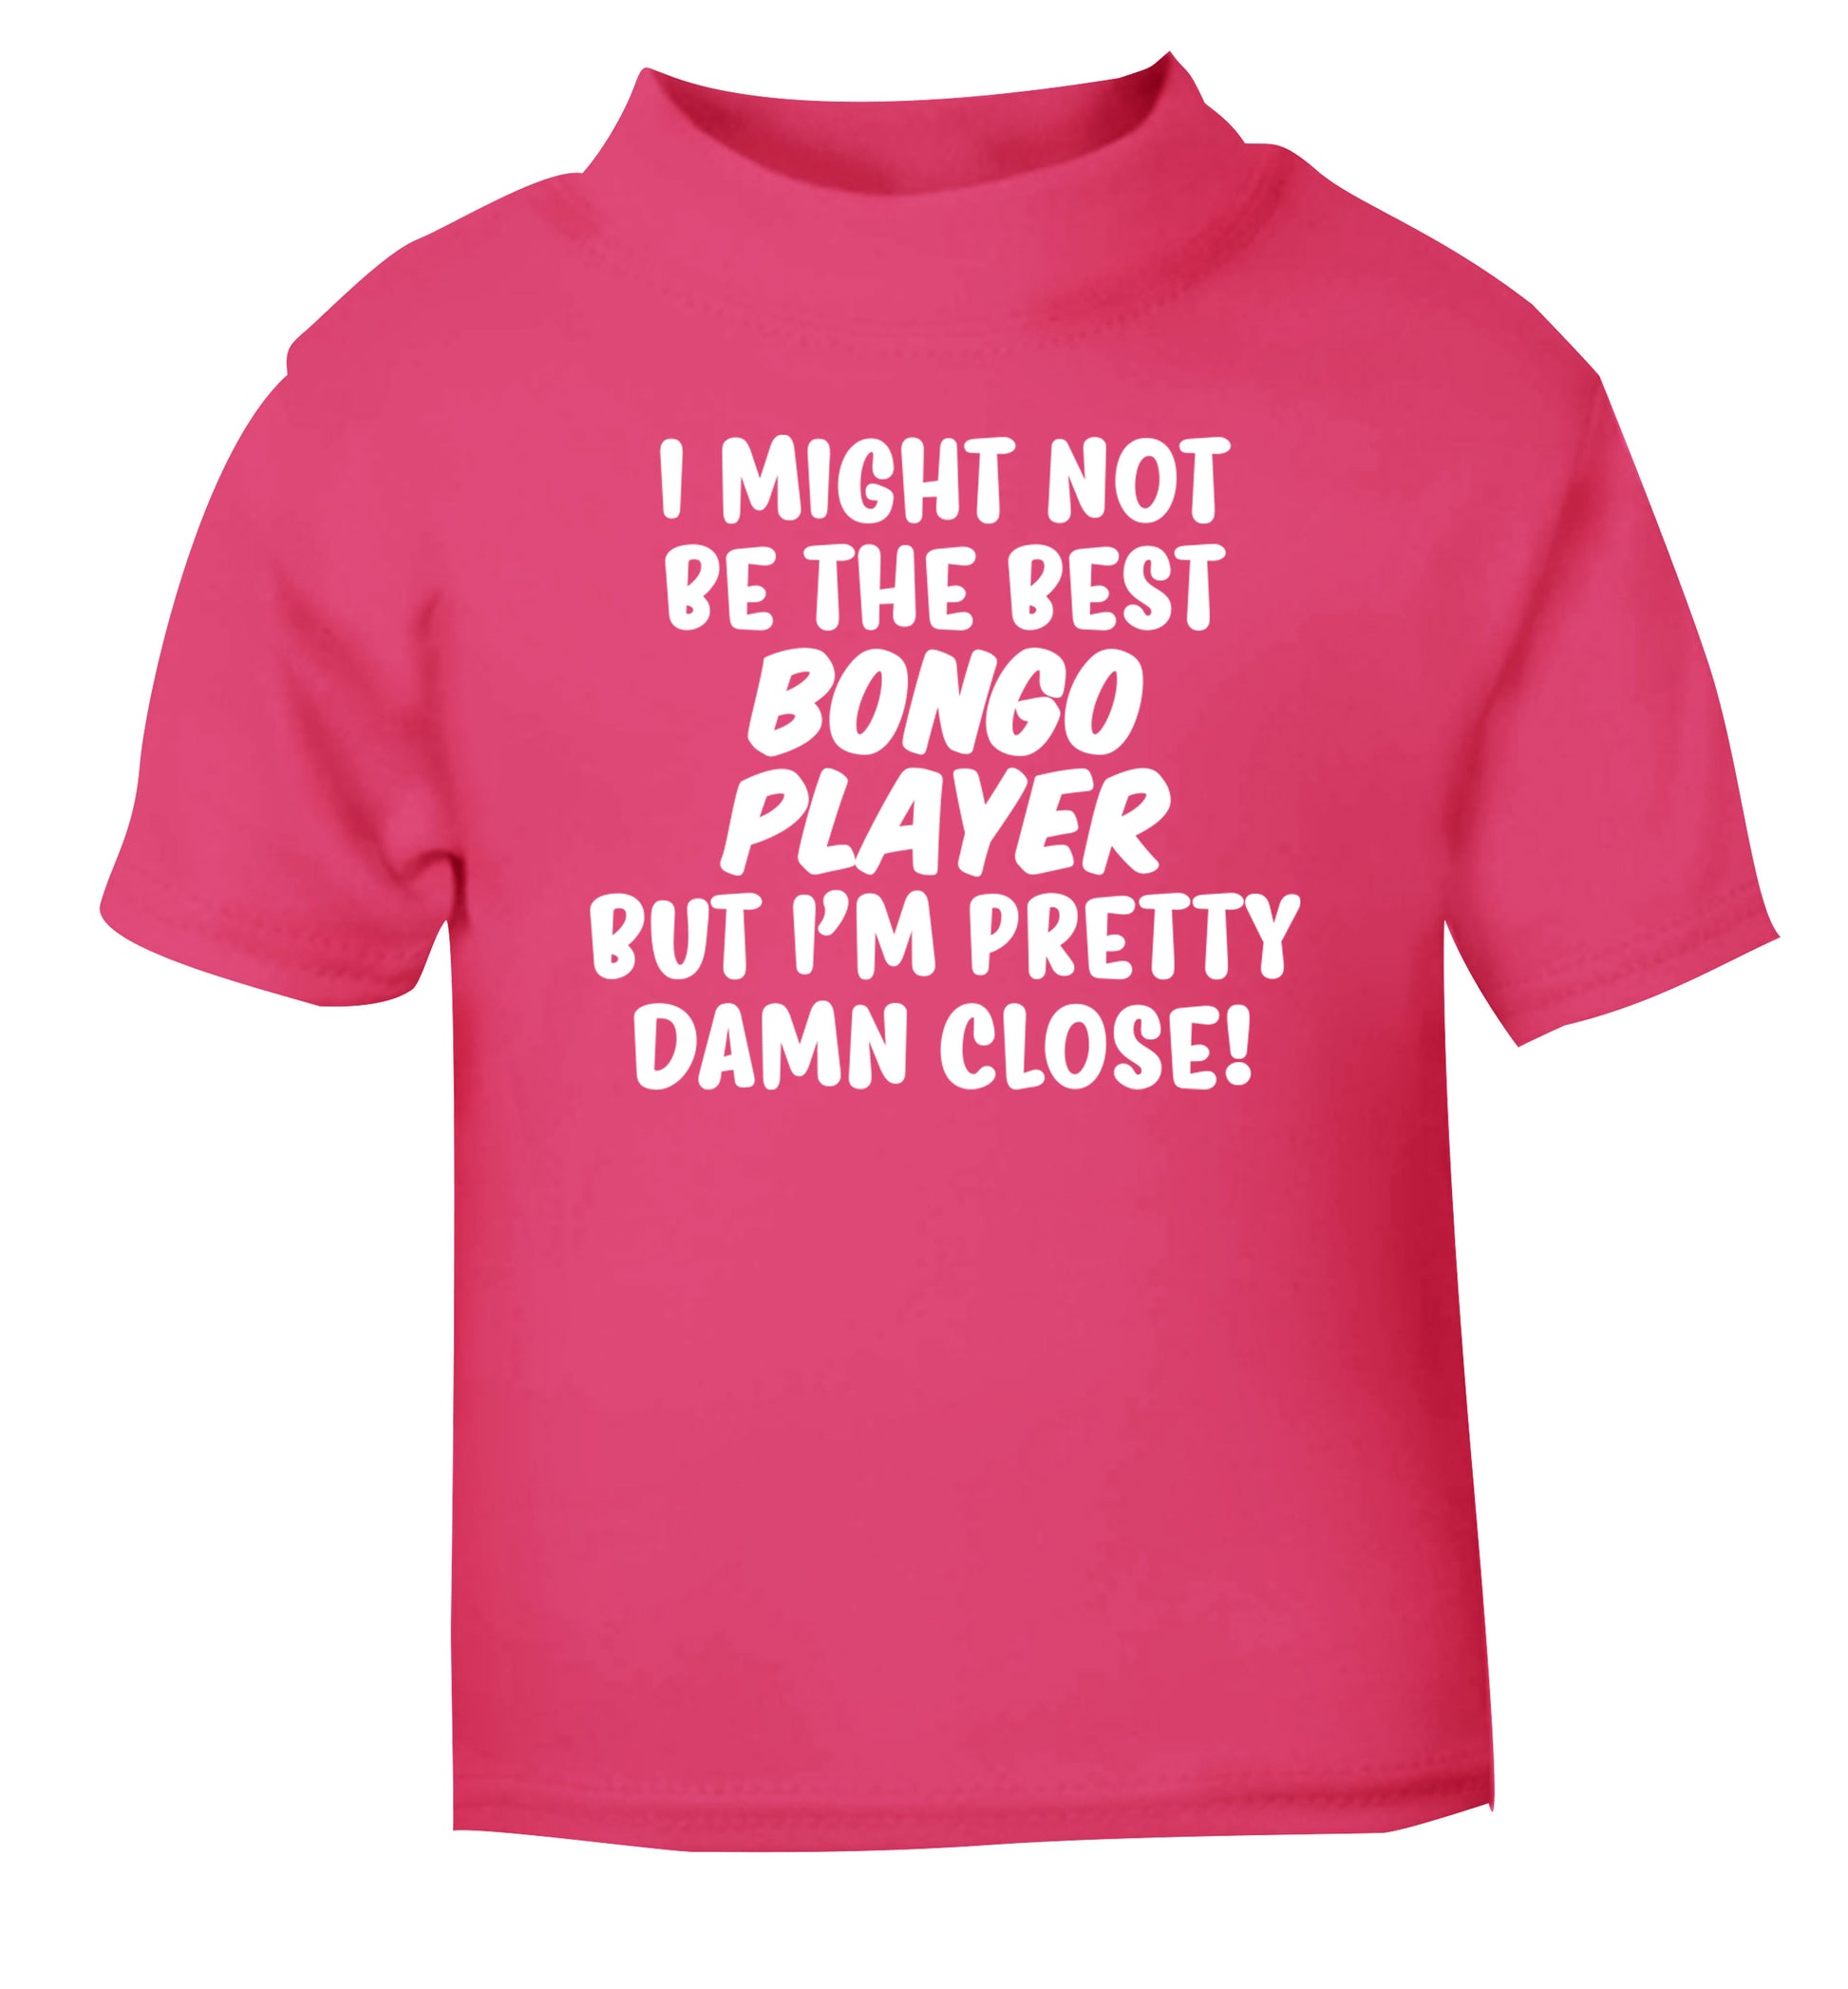 I might not be the best bongo player but I'm pretty close! pink Baby Toddler Tshirt 2 Years